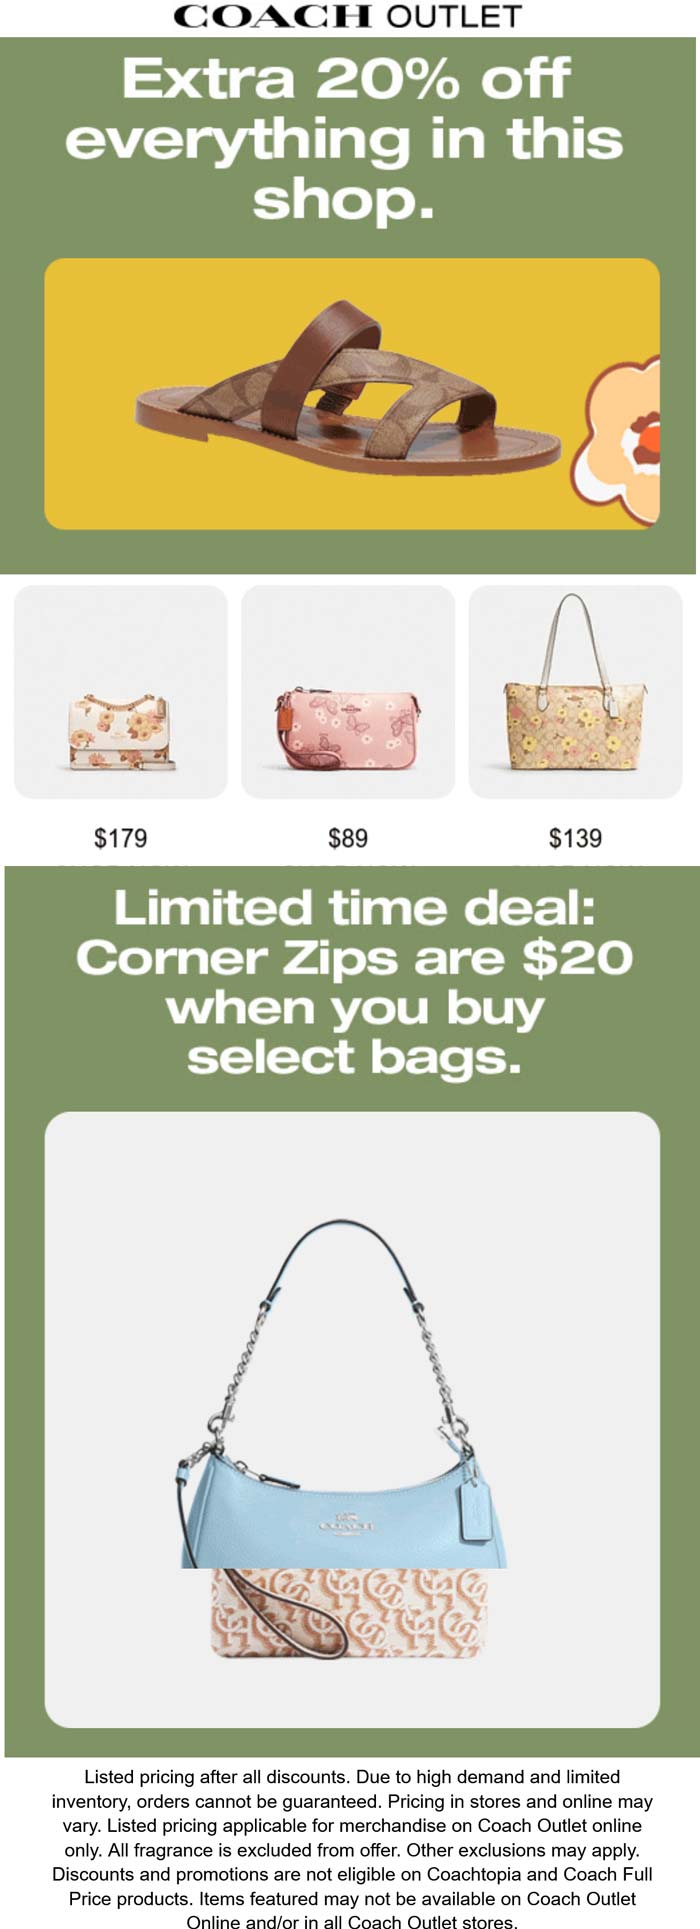 Coach Outlet stores Coupon  Extra 20% off sale items at Coach Outlet, ditto online #coachoutlet 